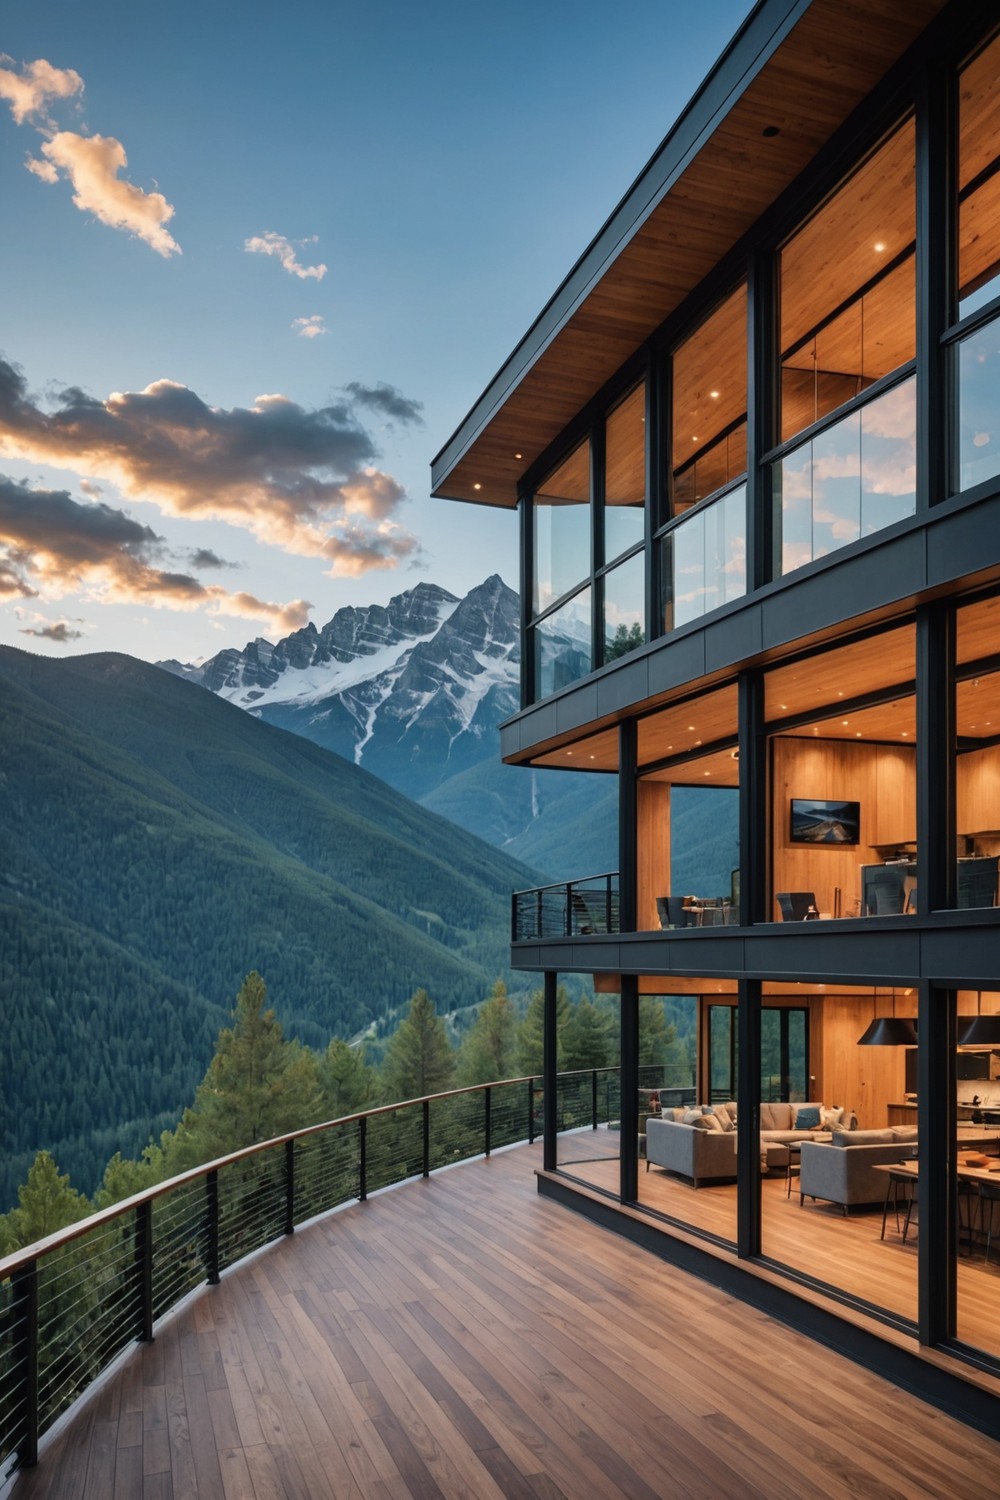 Elevated Decks with Mountain Views